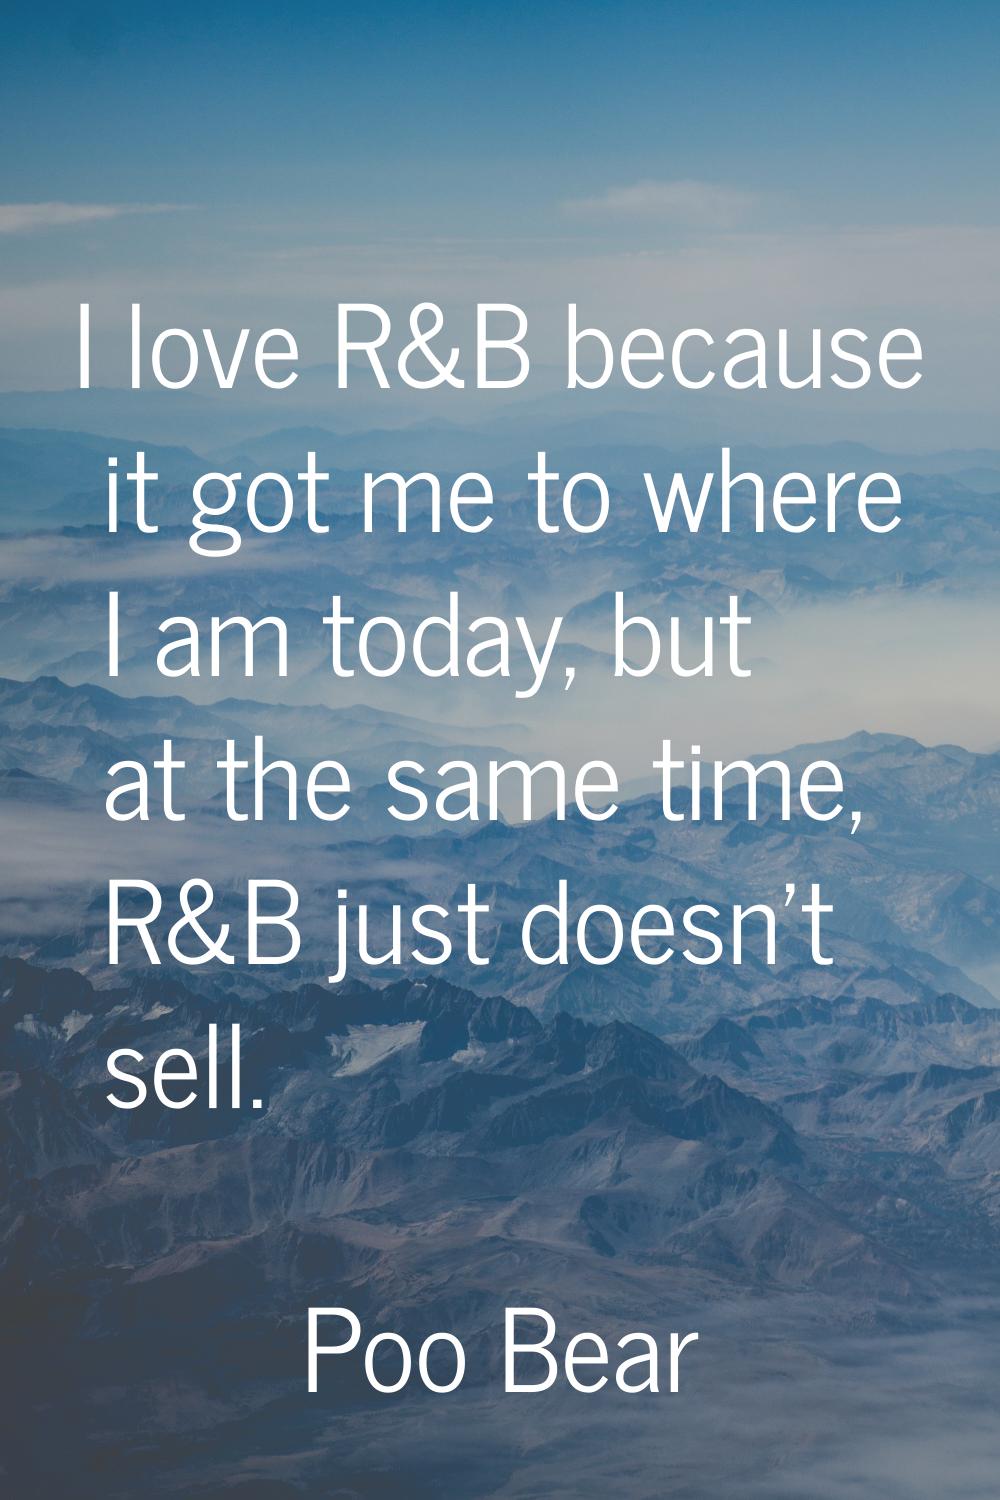 I love R&B because it got me to where I am today, but at the same time, R&B just doesn't sell.